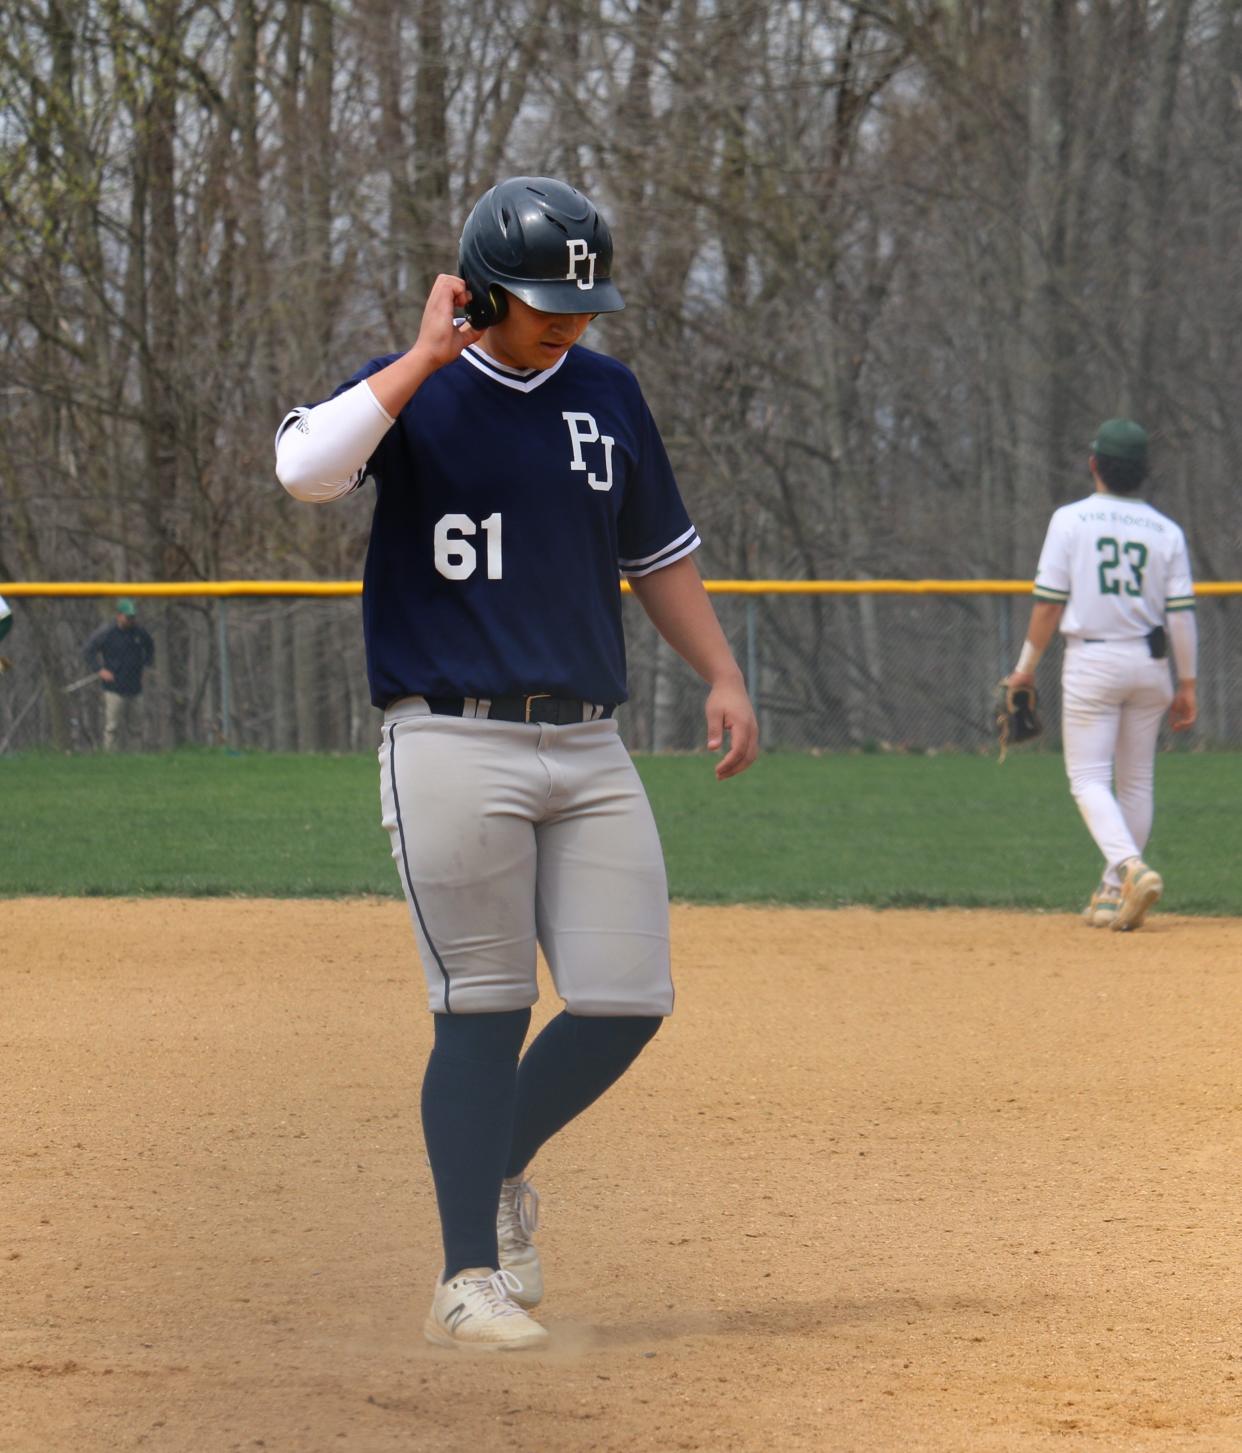 Pope John's Nick Struble had an RBI single and scored a run in a loss to St. Joseph Regional in an independent matchup. St. Joseph defeated Pope John 13-8 on Saturday April 16, 2022 in Montvale.